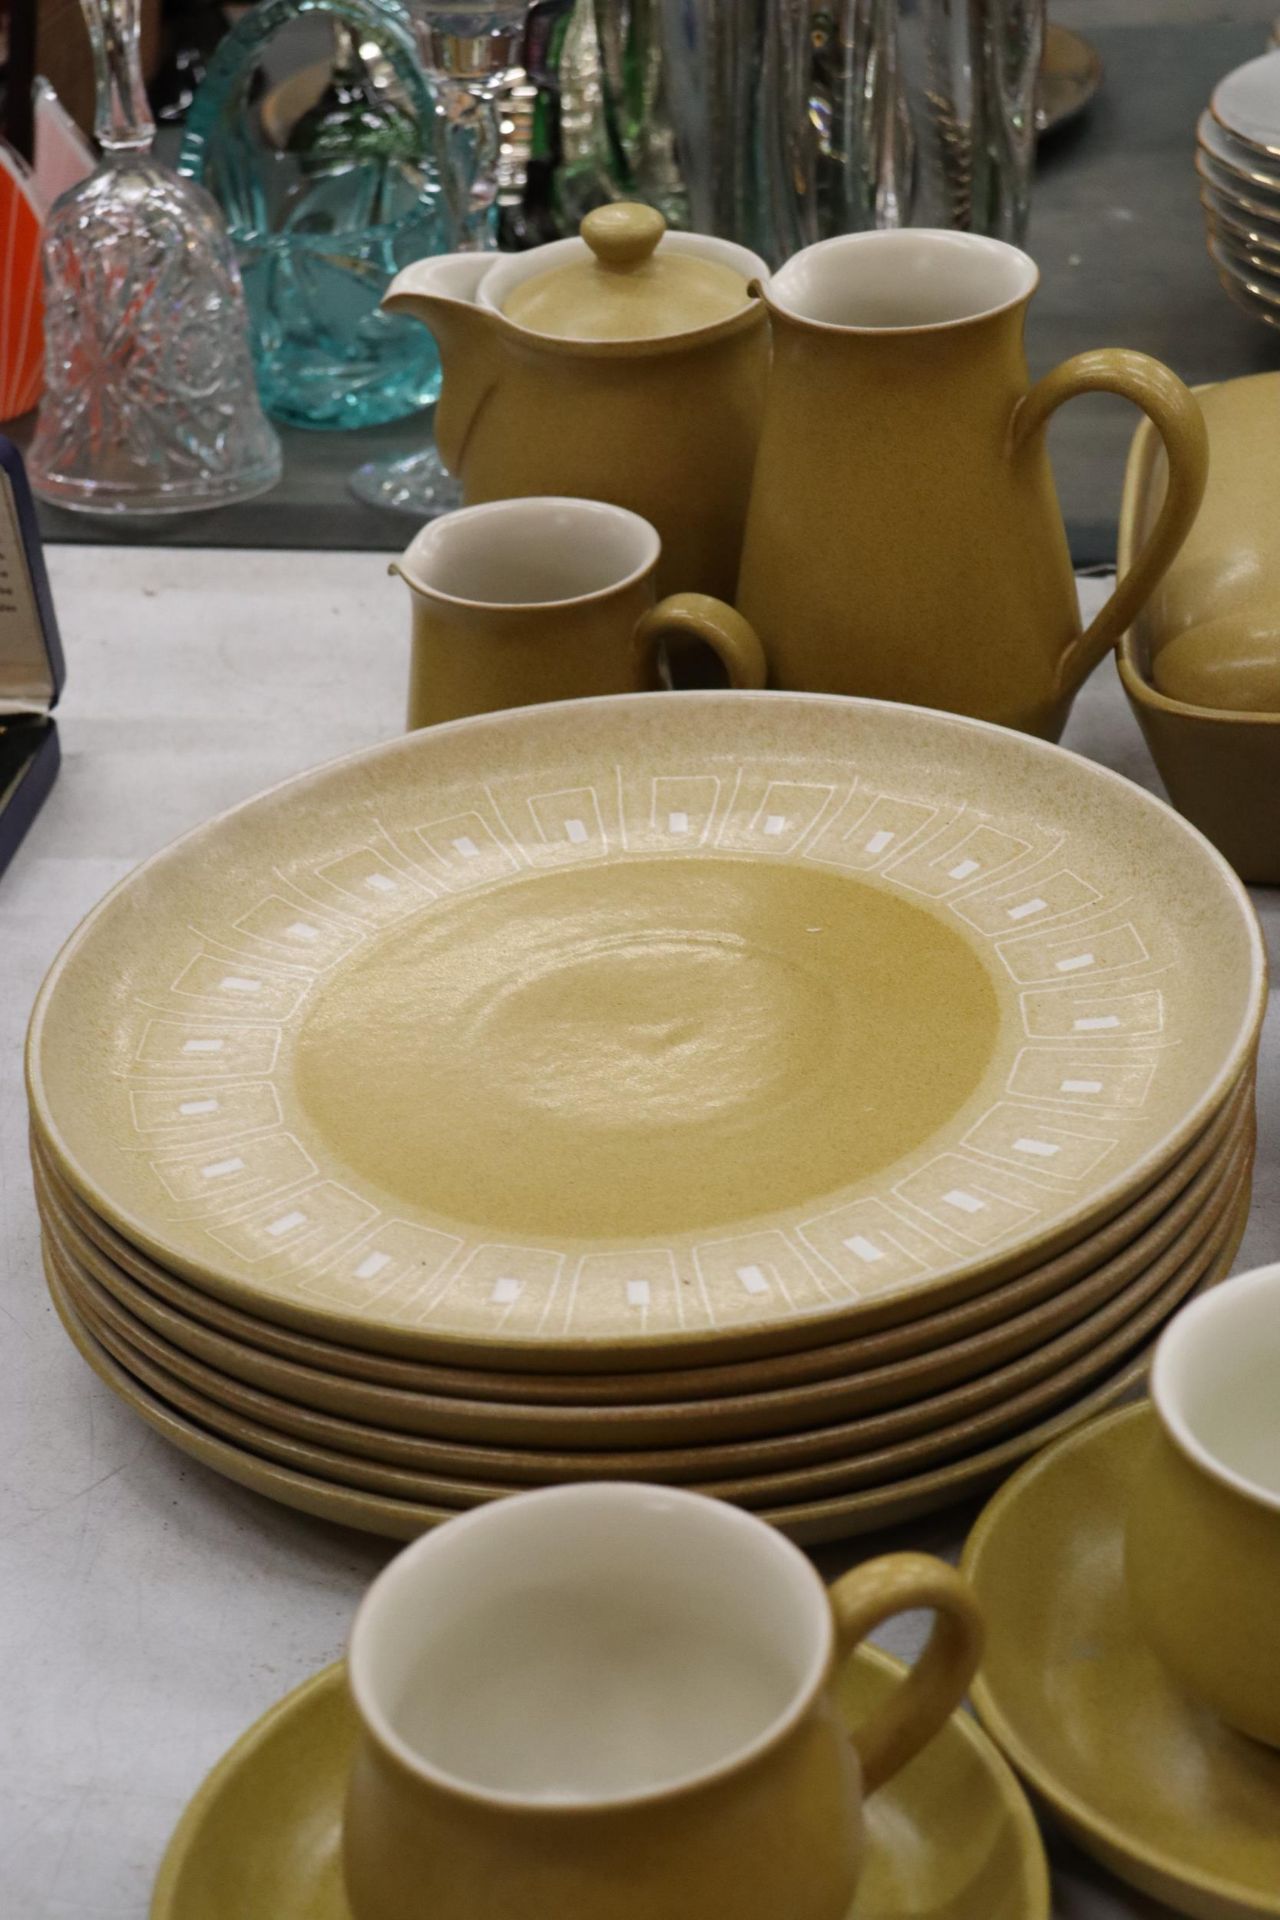 A DENBY MUSTARD COLOURED DINNER SERVICE, TO INCLUDE VARIOUS SIZES OF PLATES, A CASSEROLE DISH, - Image 6 of 9